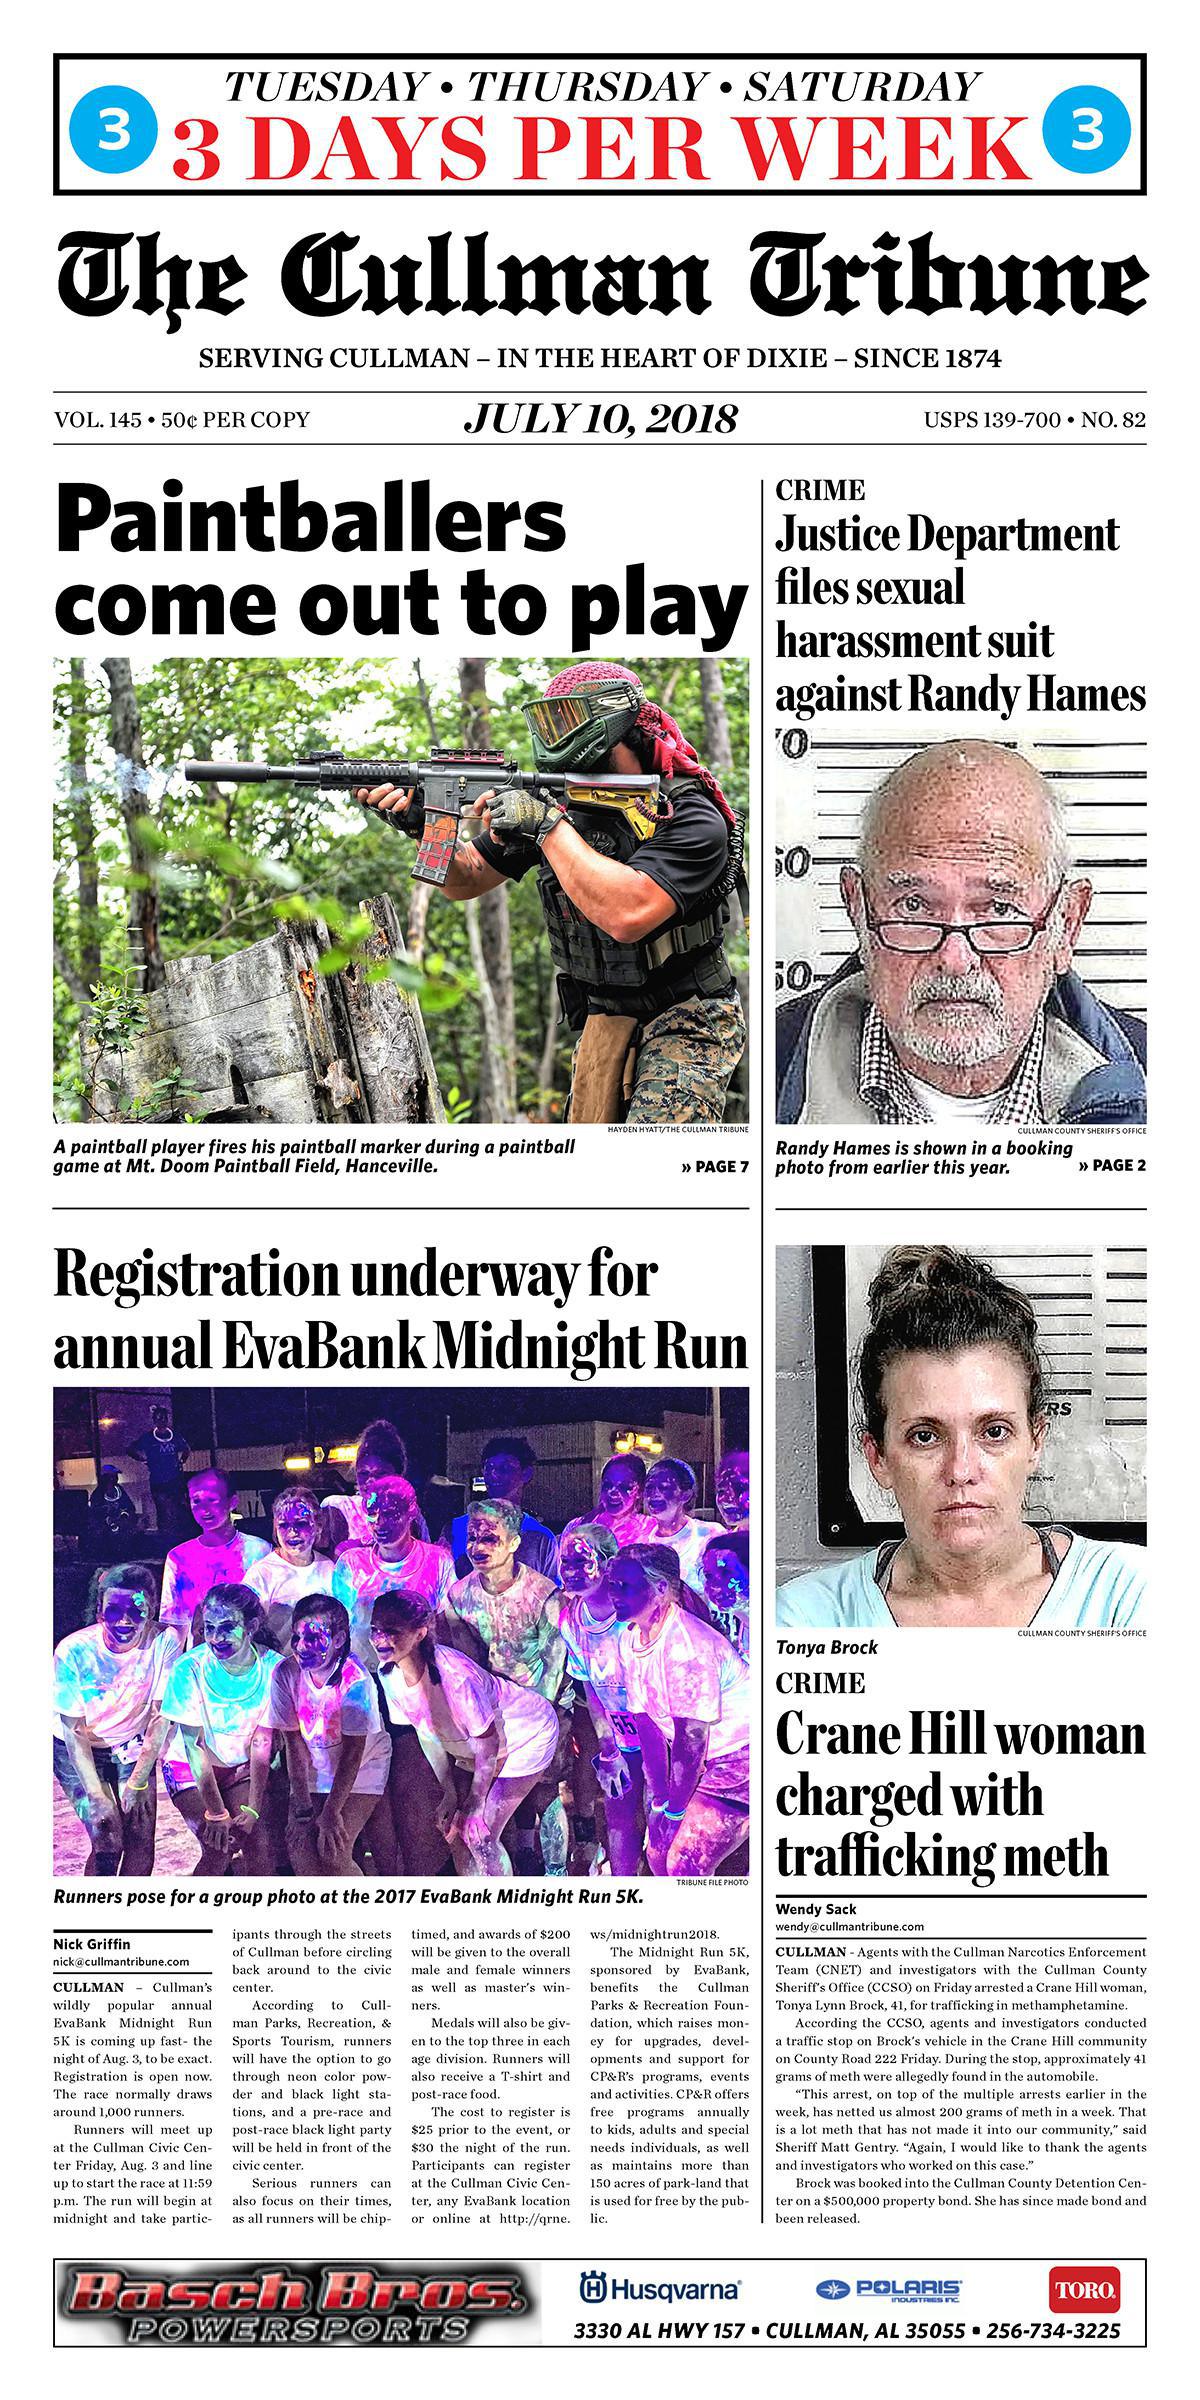 Good Morning Cullman! The 07-10-2018 edition of the Cullman Tribune is now ready to view